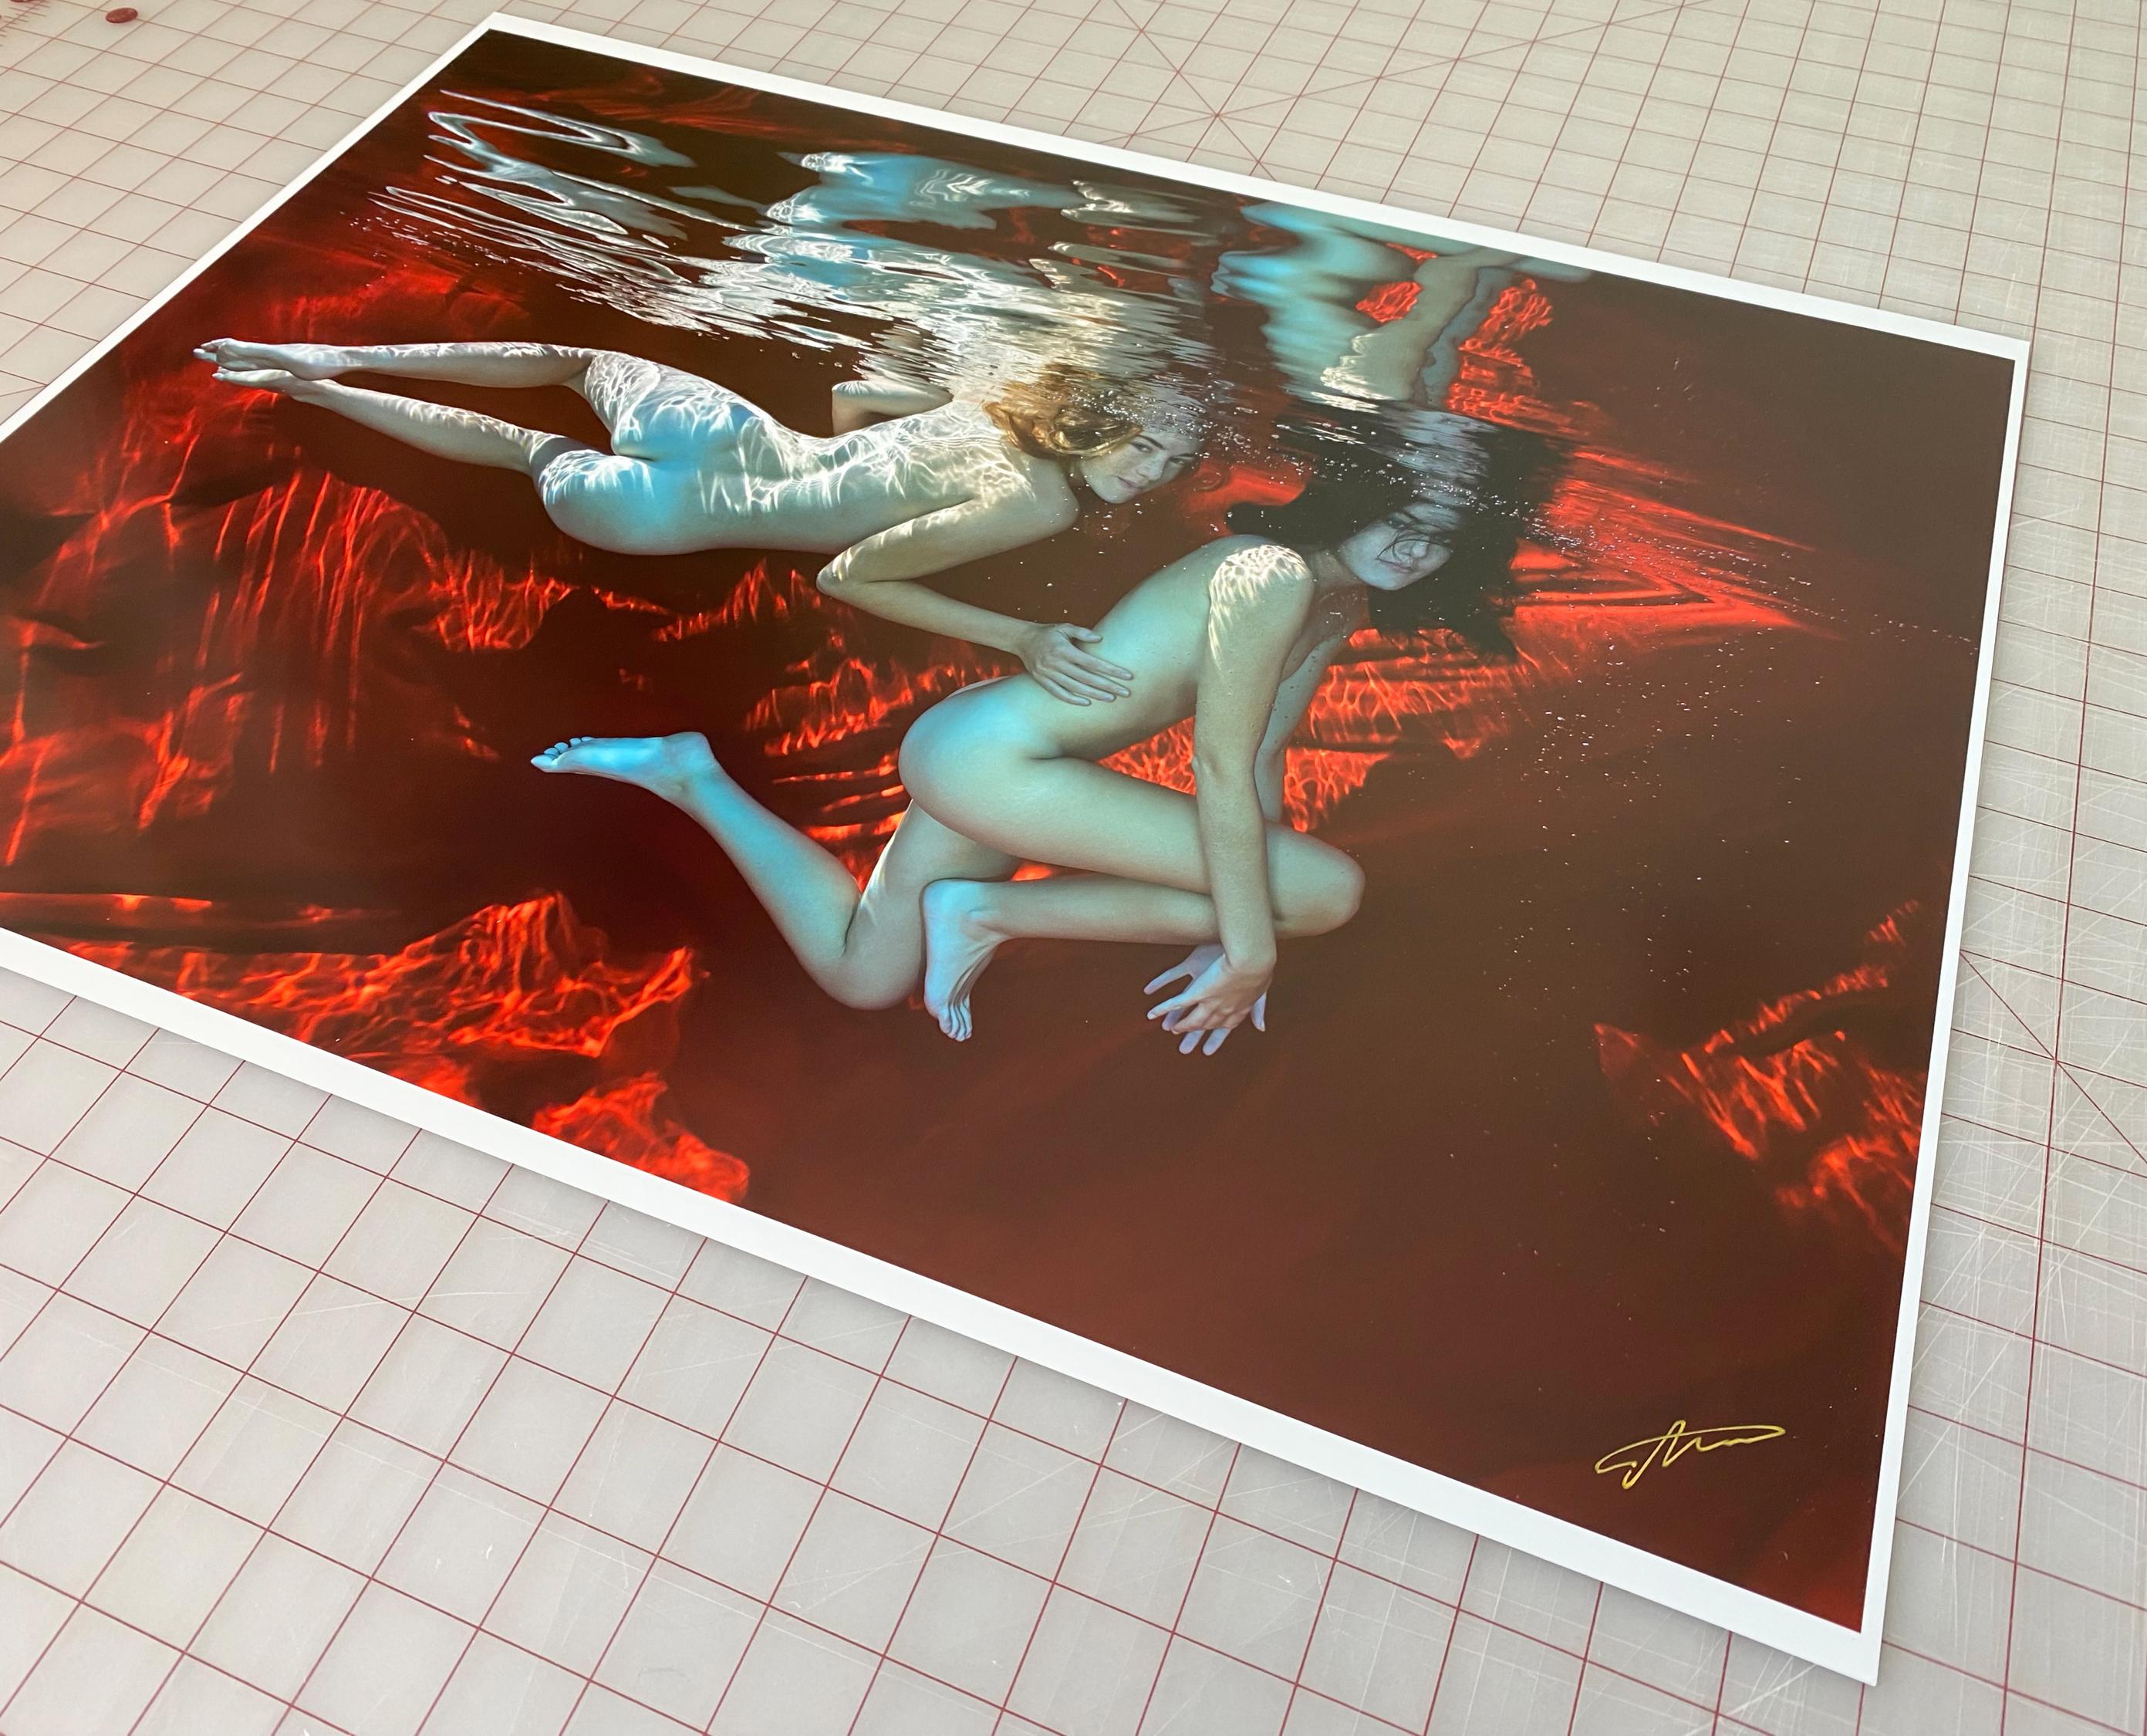 An underwater photograph of two naked models on red background.

Original gallery quality digital archival pigment print on archival paper signed by the artist. 
Limited edition of 24
The artwork is furnished with certificate of authenticity with